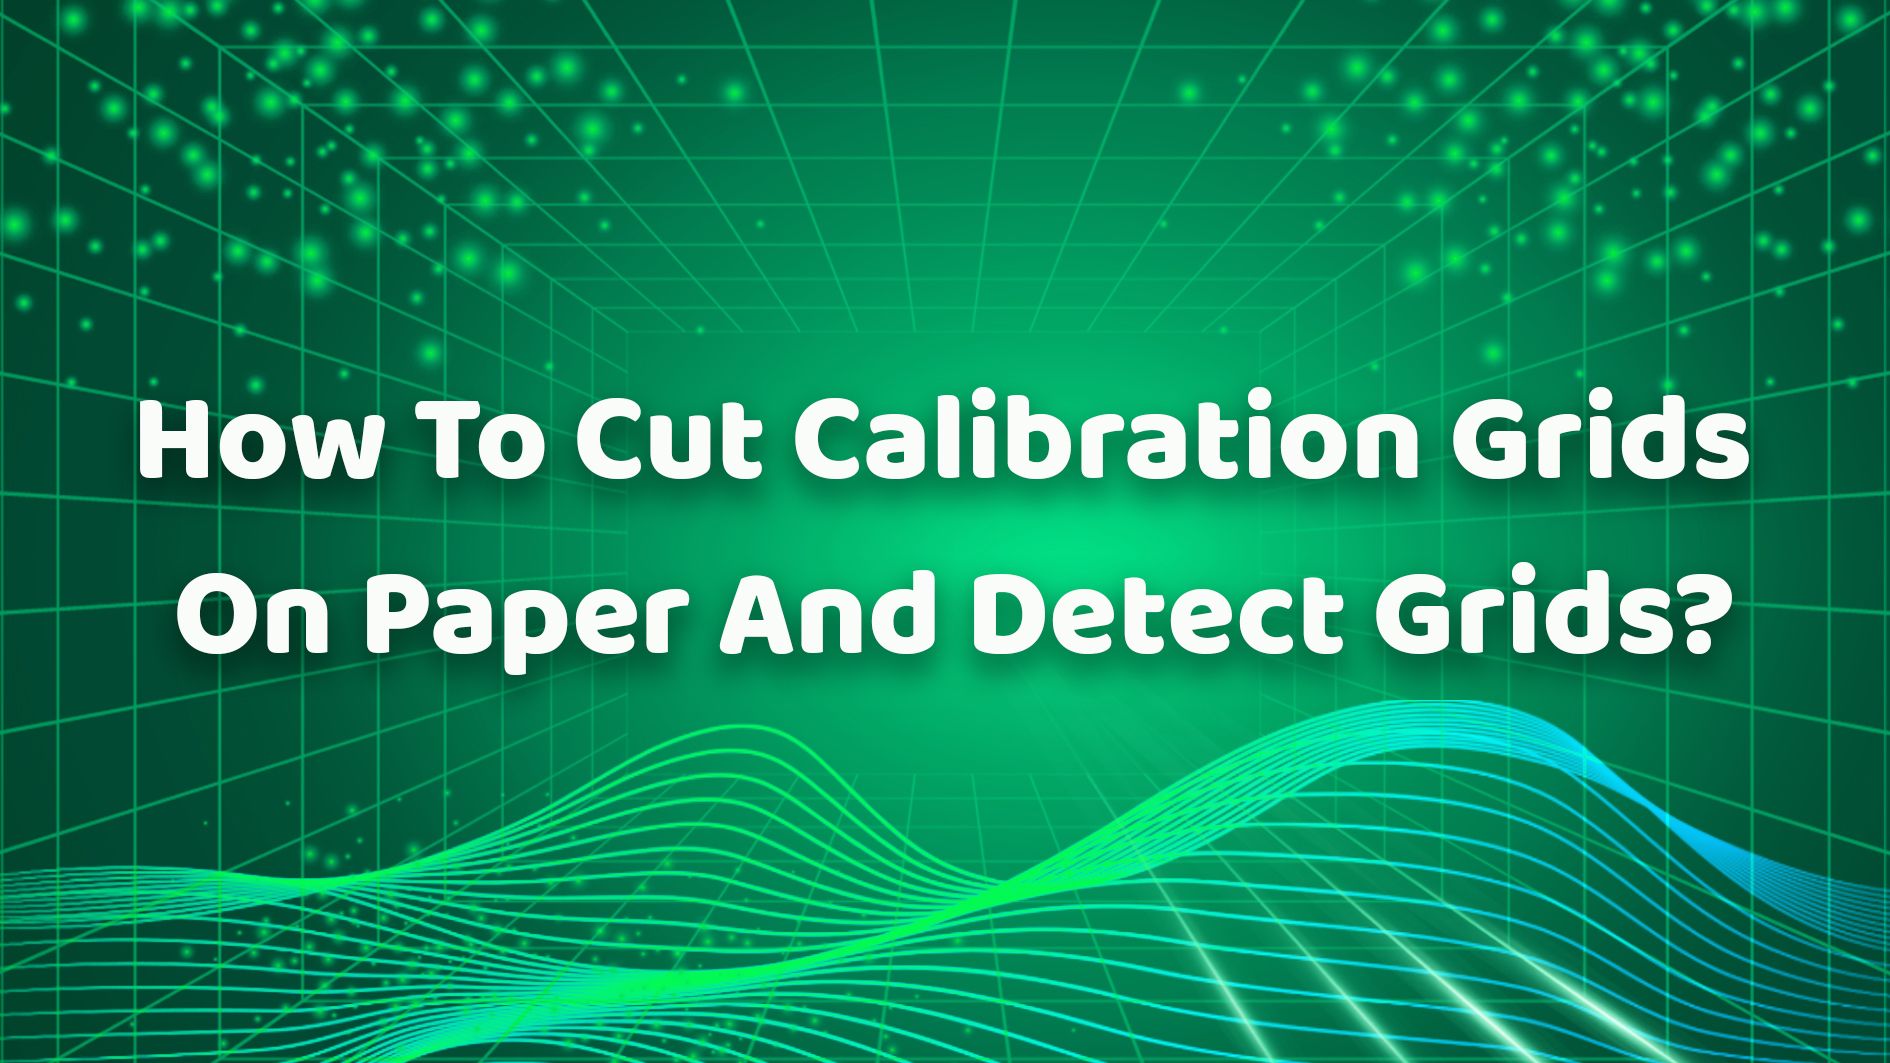 How To Cut Calibration Grids On Paper And Detect Grids？